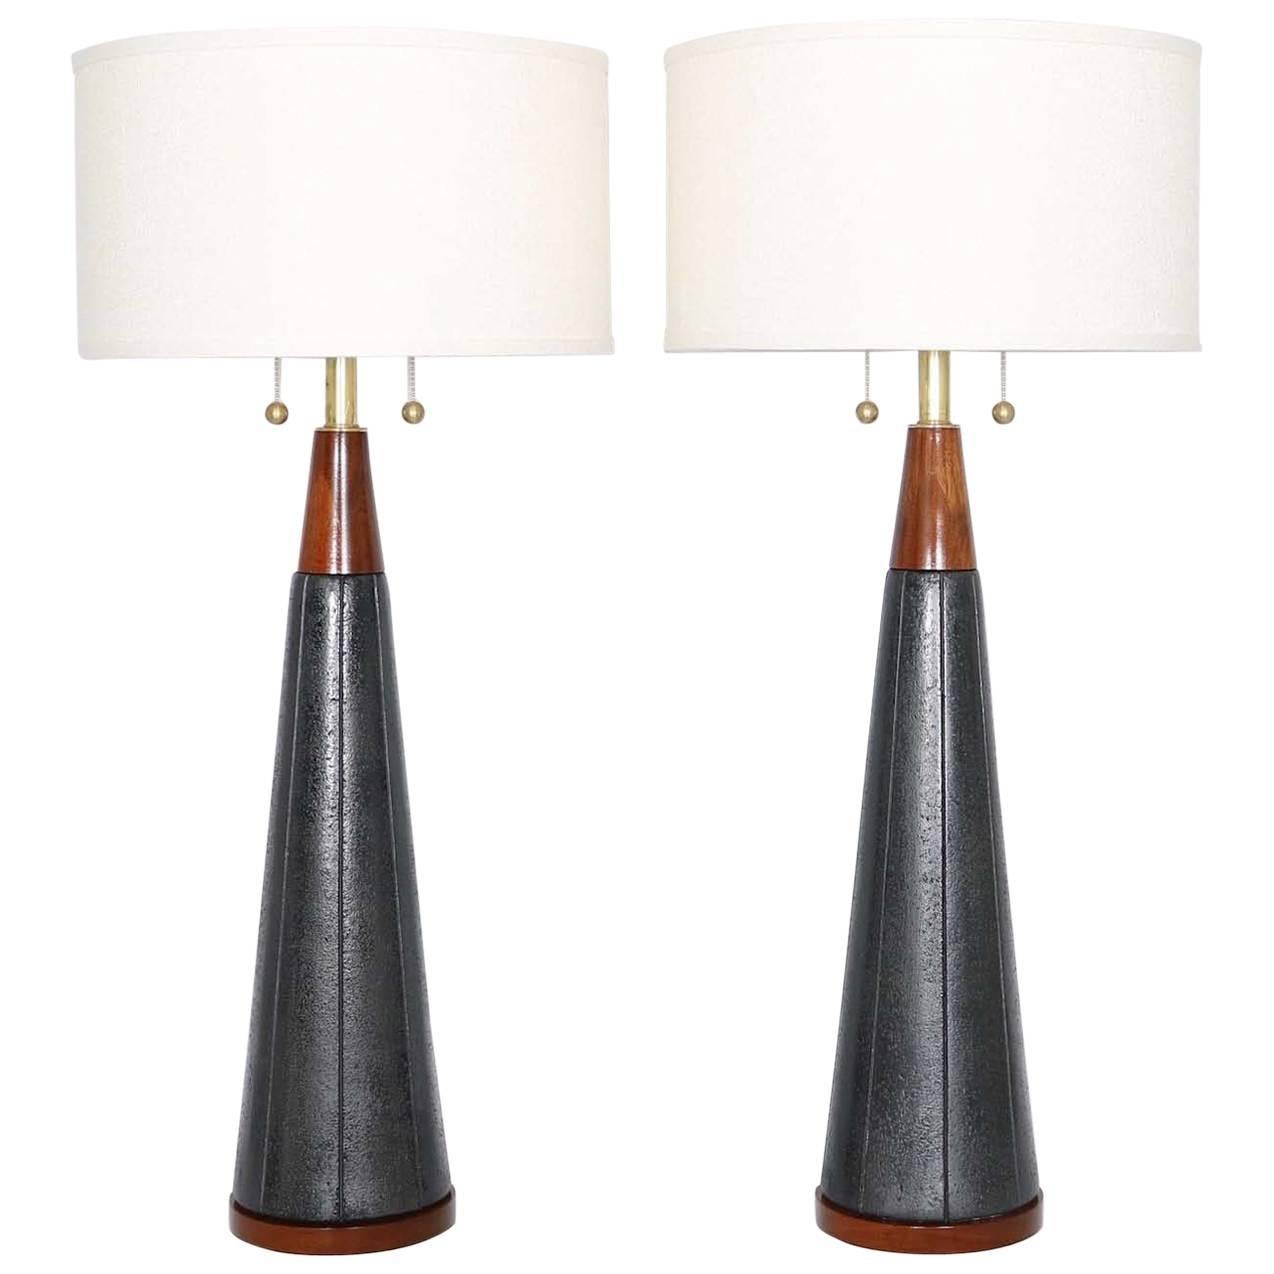 Pair of Mid-Century Modern Black Ceramic and Walnut Lamps by Quartite Creative